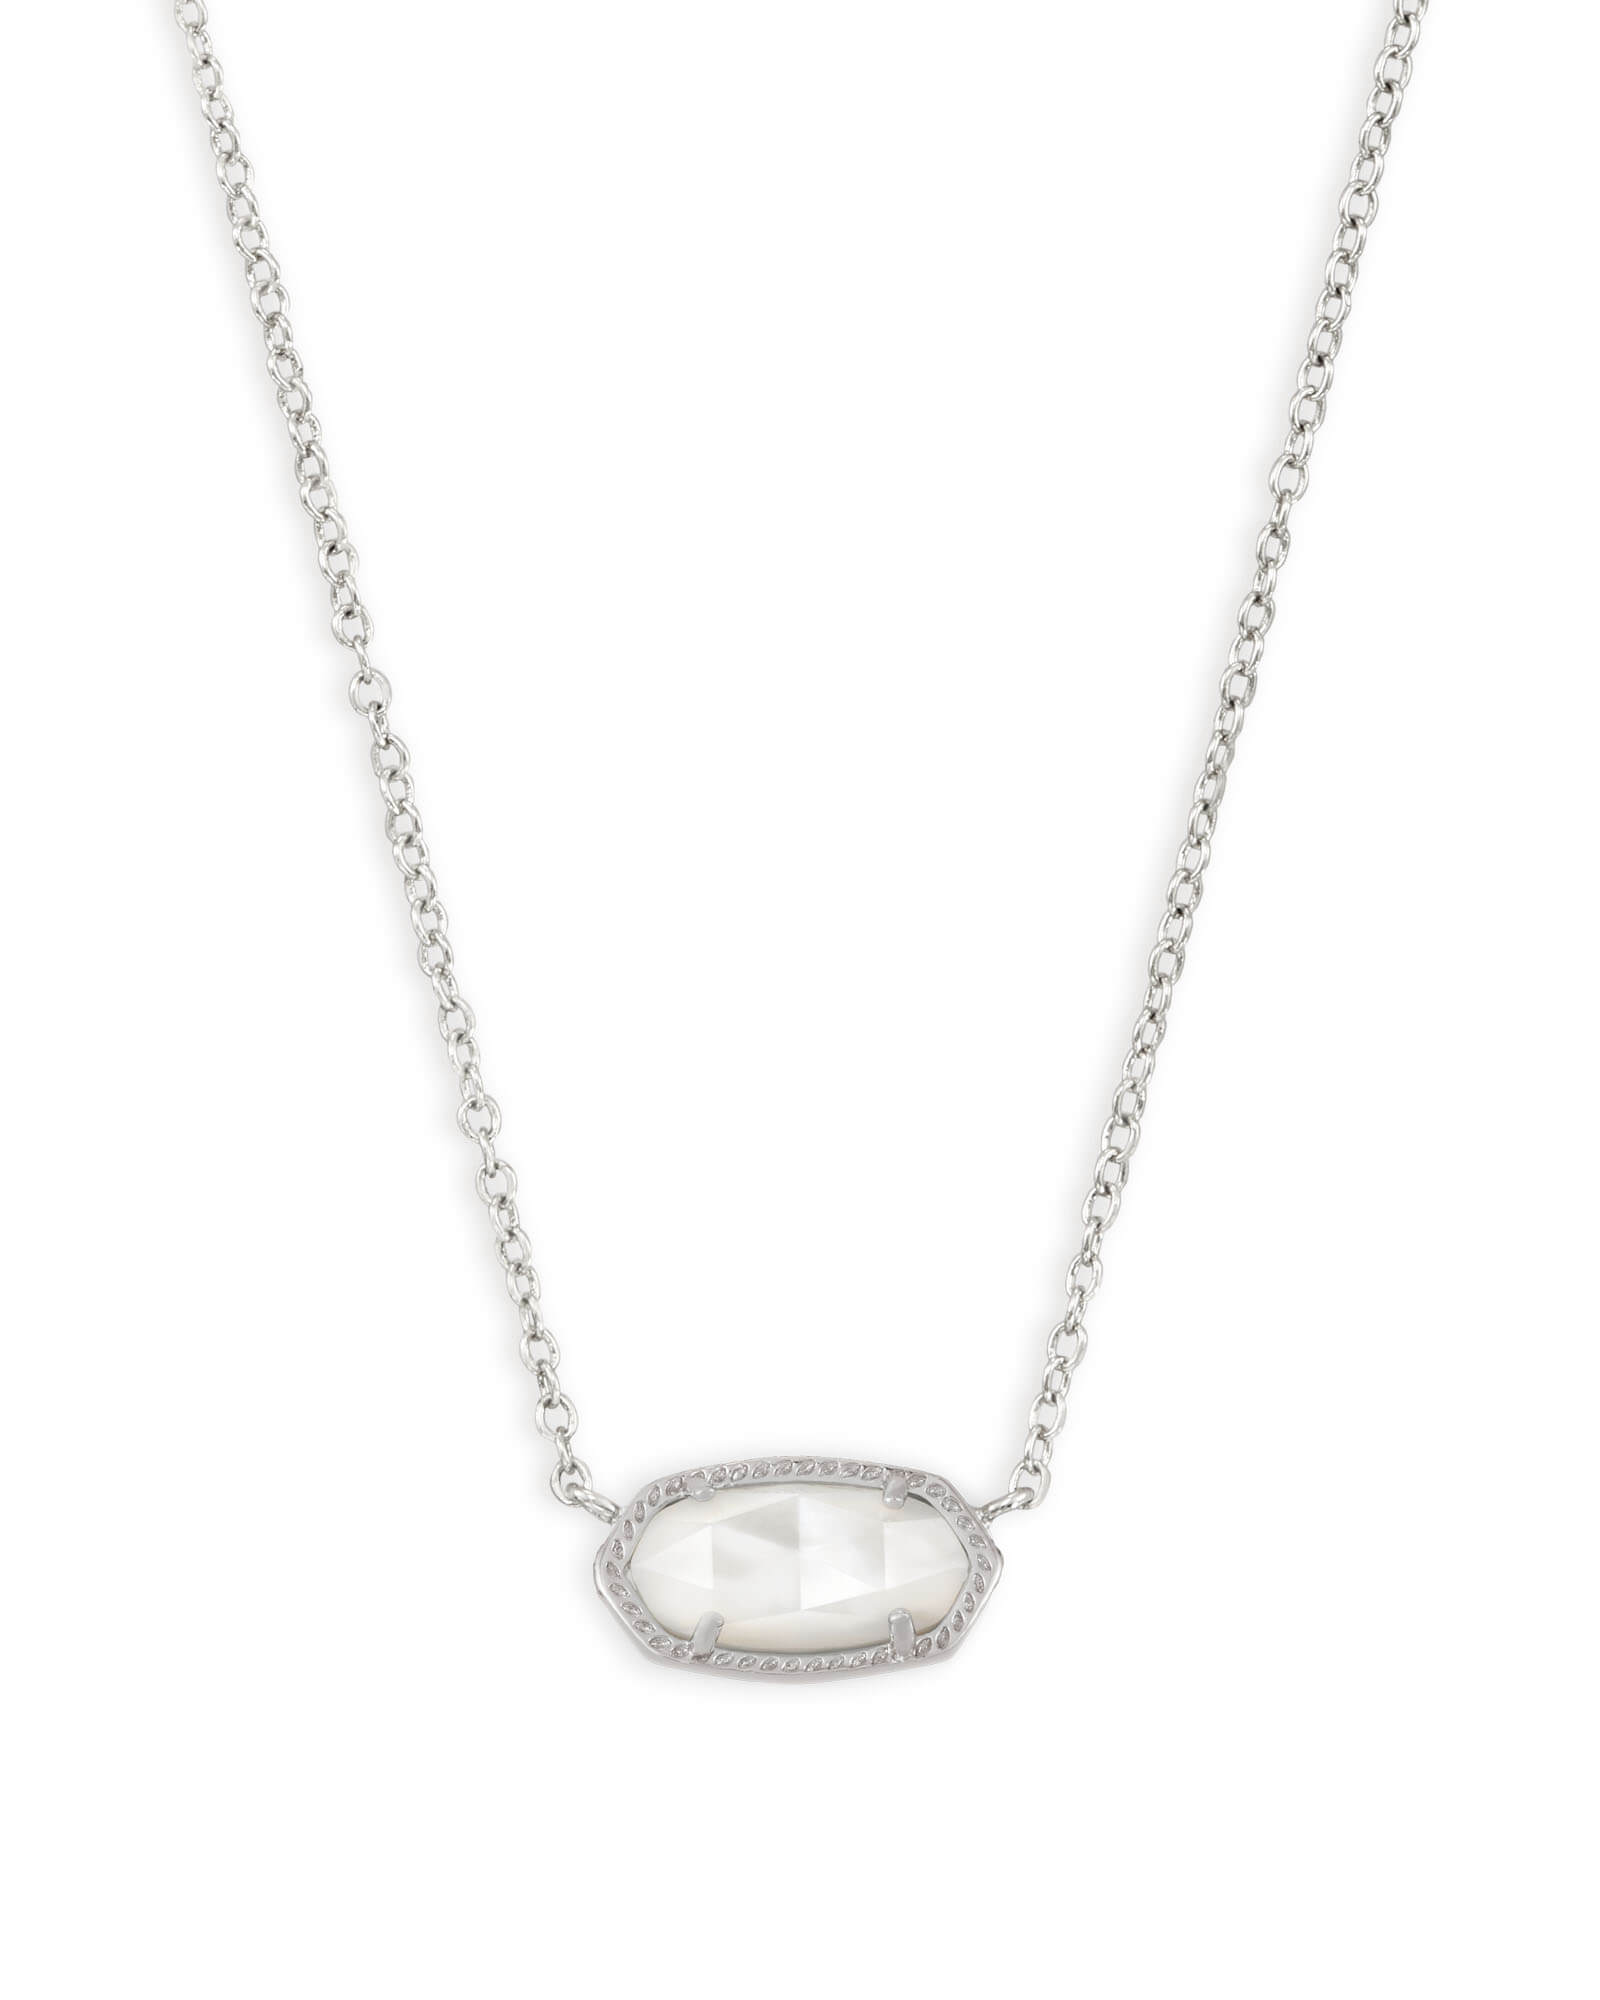 Elisa Silver Short Pendant Necklace In Ivory Mother-Of-Pearl | Kendra Scott